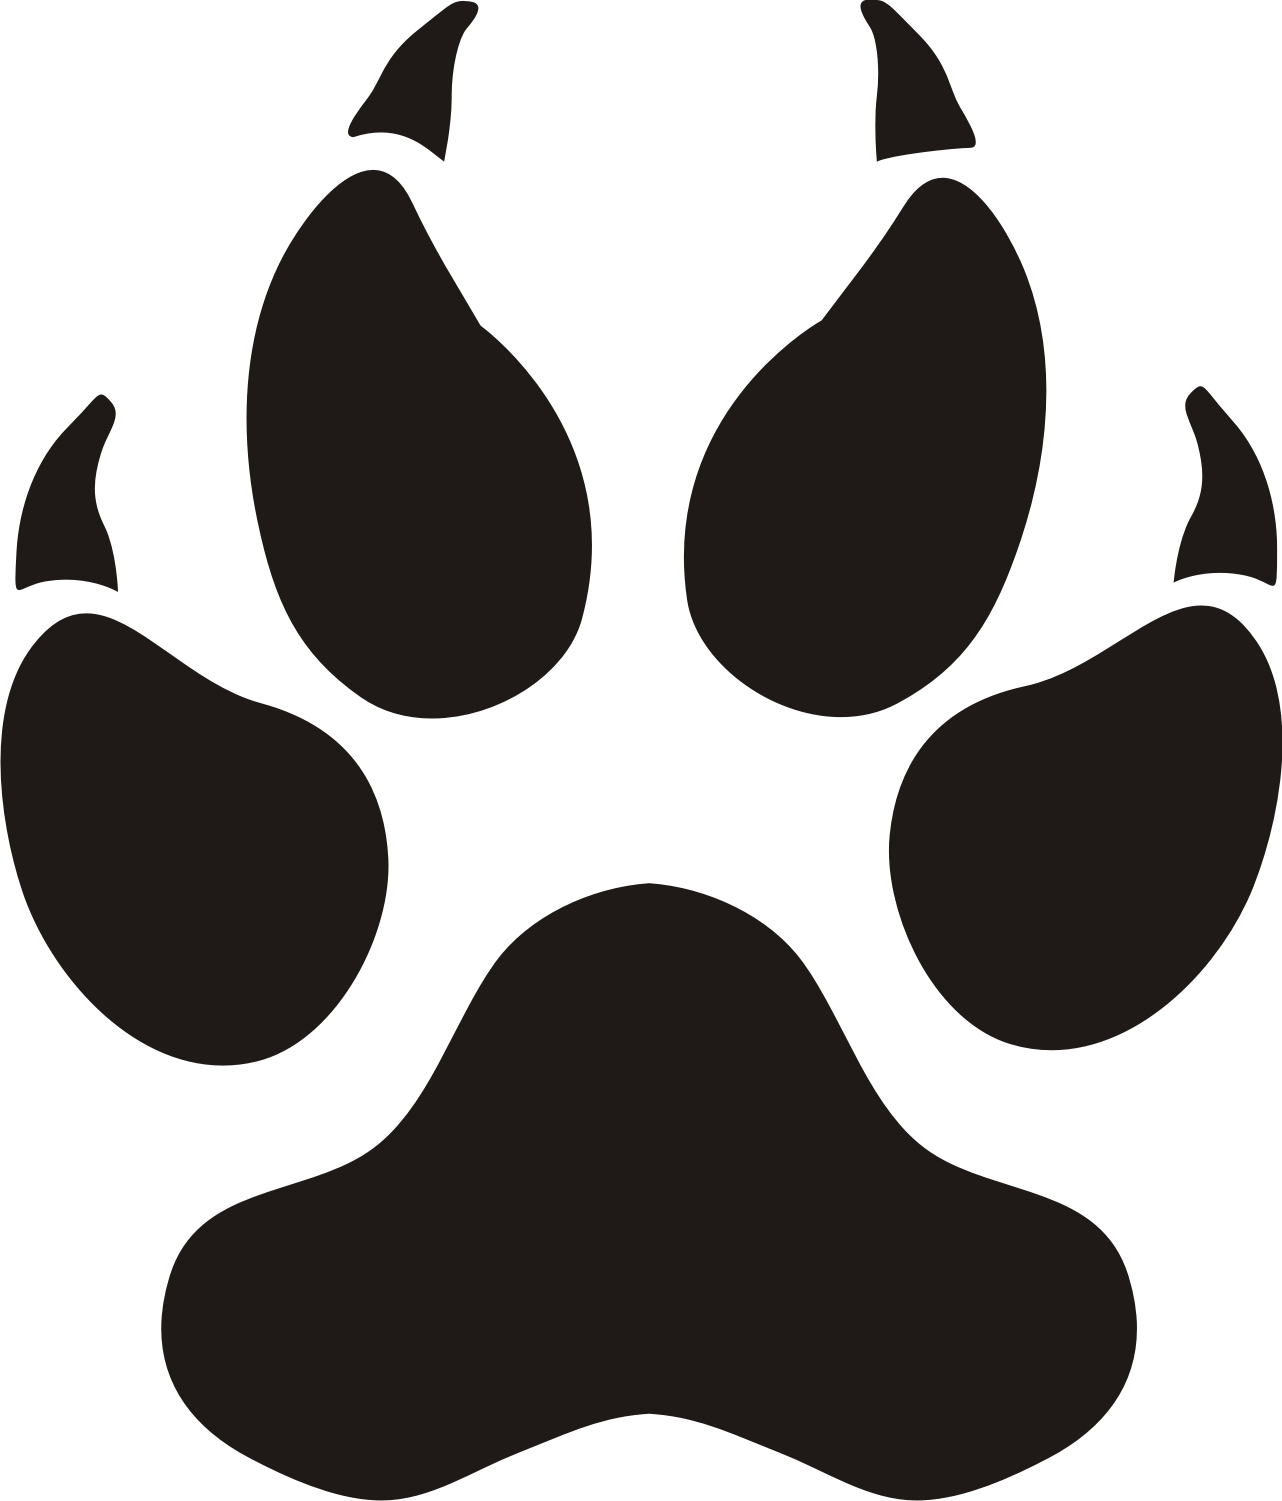 Small Panther Paw Print Images - ClipArt Best